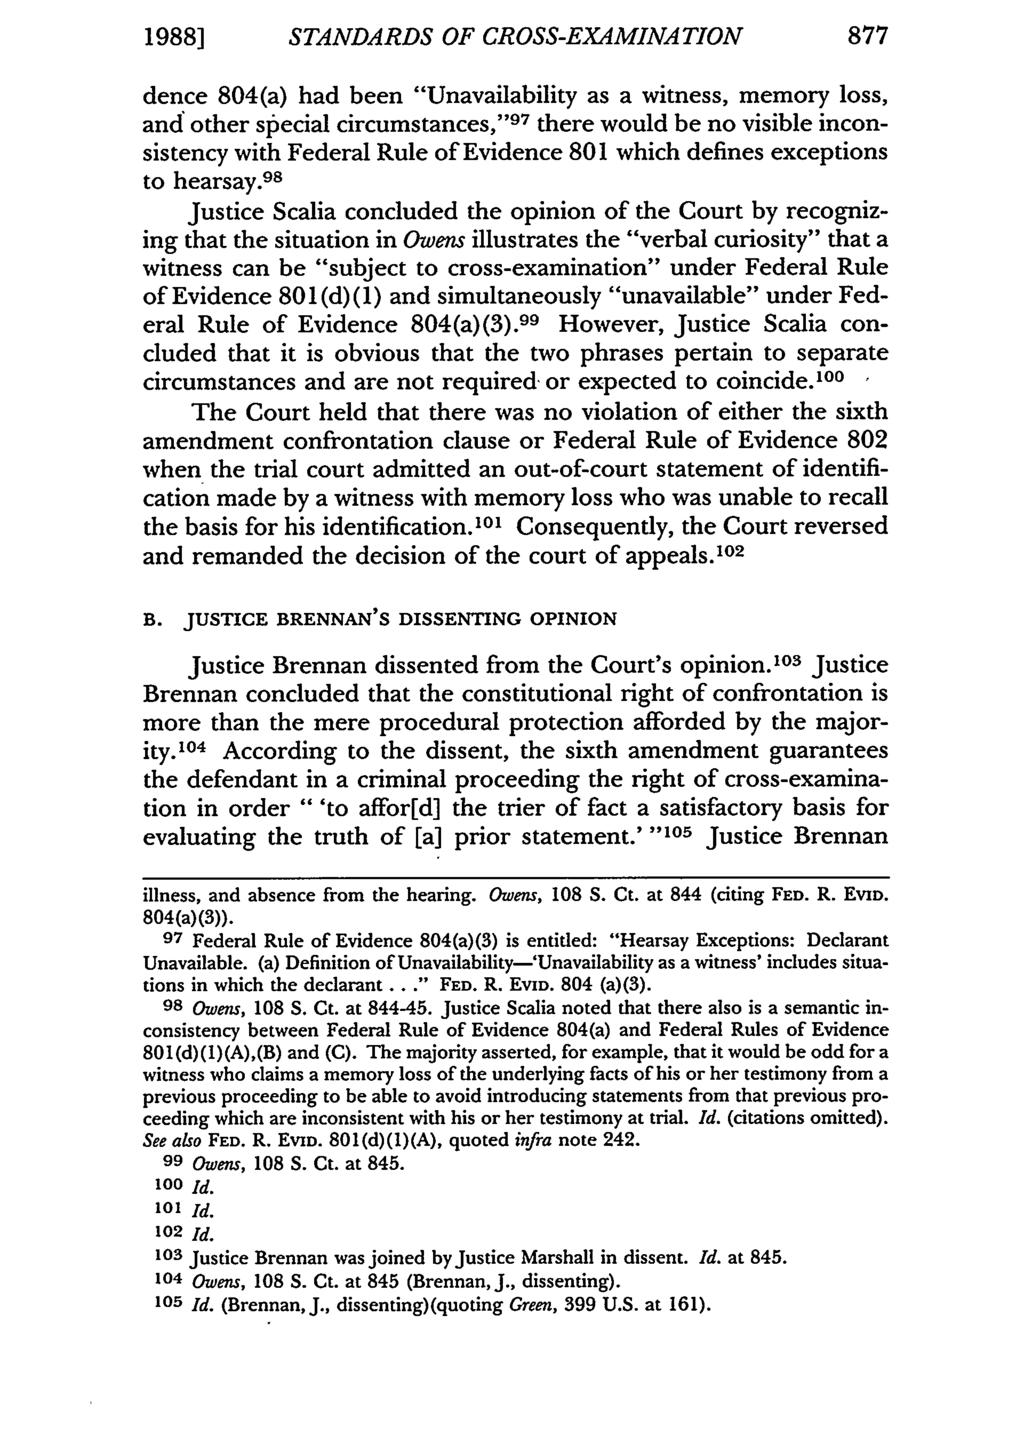 1988] STANDARDS OF CROSS-EXAMINATION 877 dence 804(a) had been "Unavailability as a witness, memory loss, and other special circumstances," 97 there would be no visible inconsistency with Federal